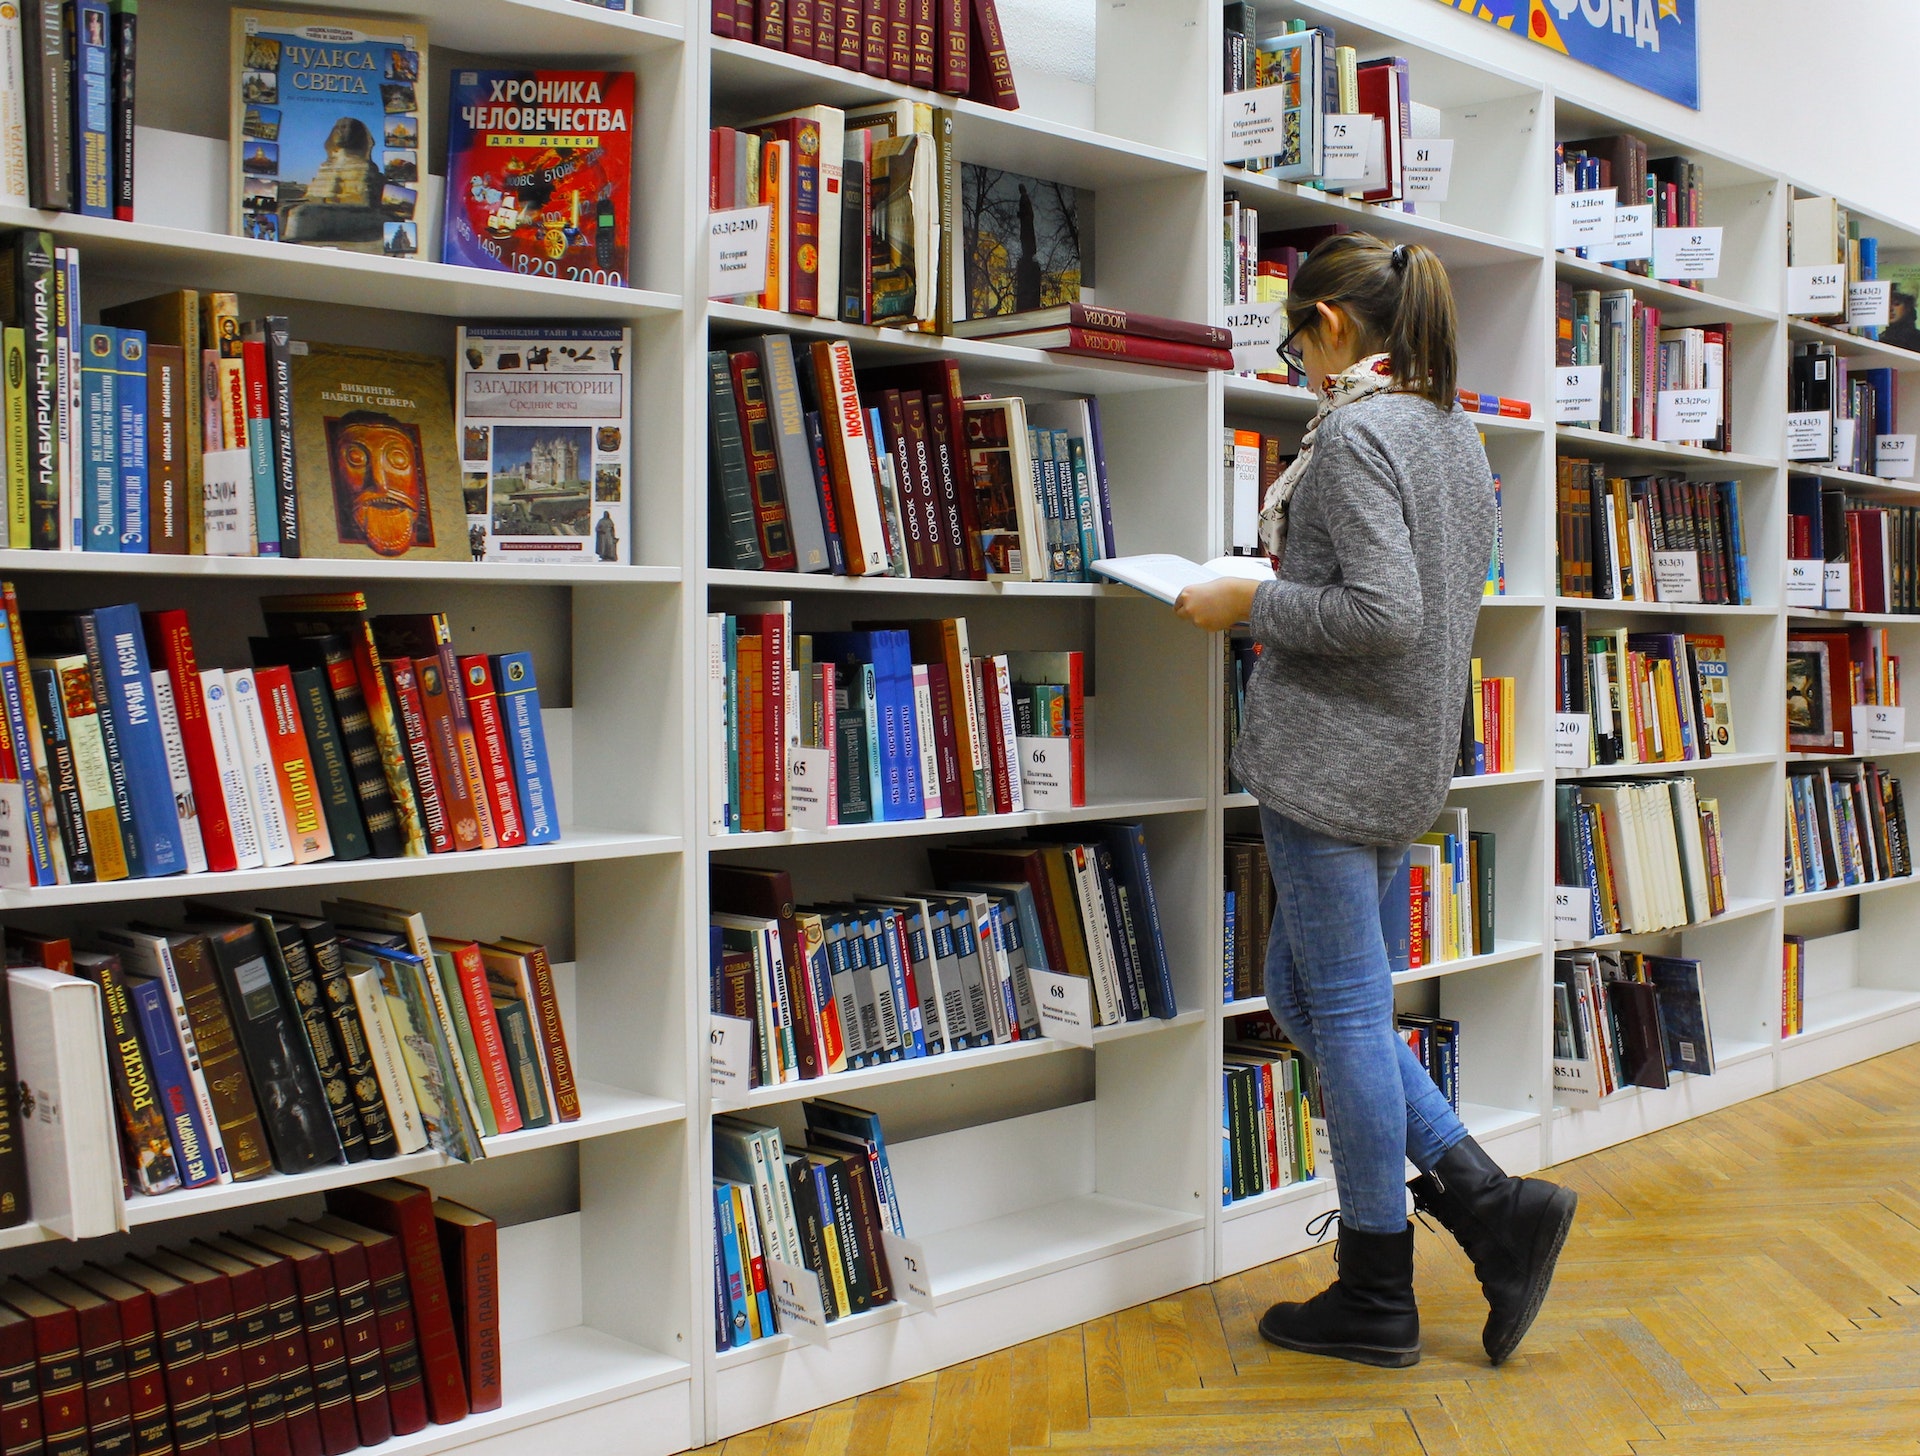 consider buying used textbooks or renting them